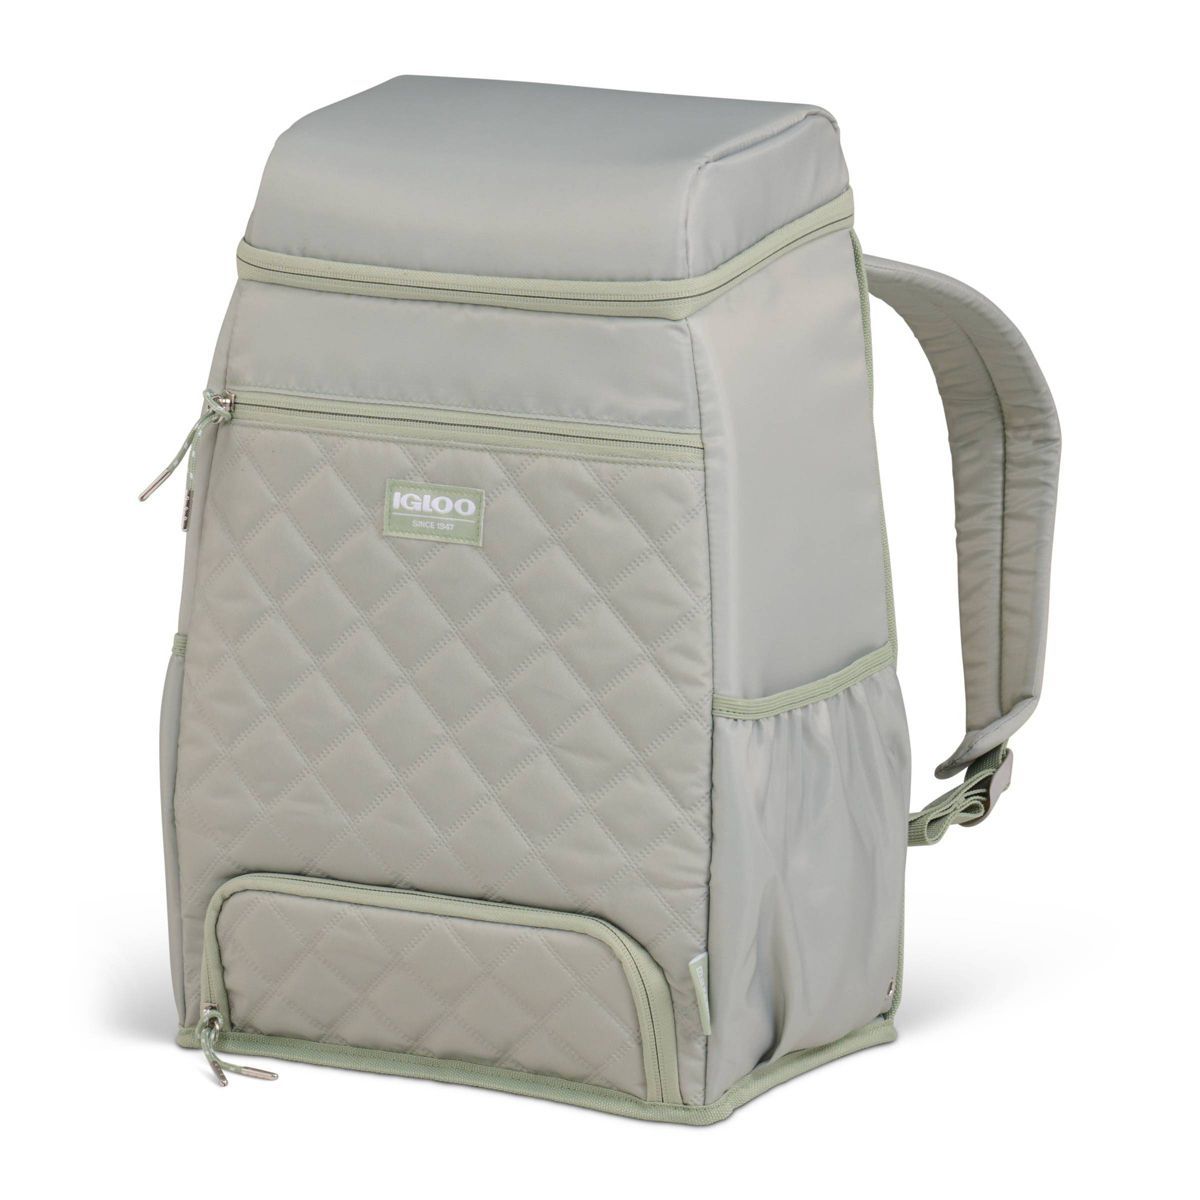 Igloo MaxCold Duo Backpack 20 Soft-Sided Cooler - Sage | Target